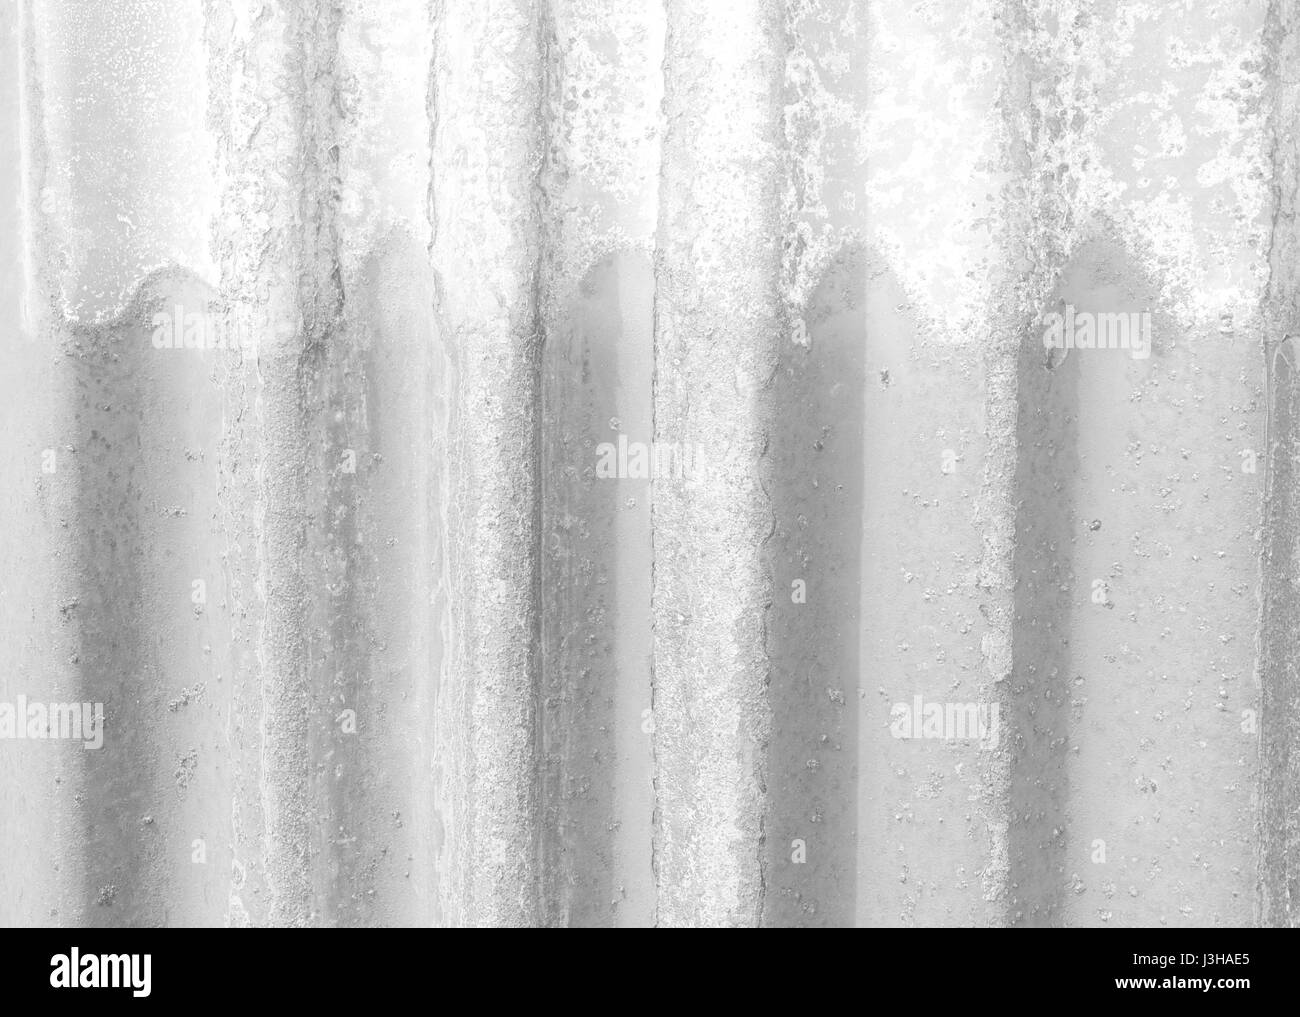 White Stain Zinc Wall Texture Background. Stock Photo